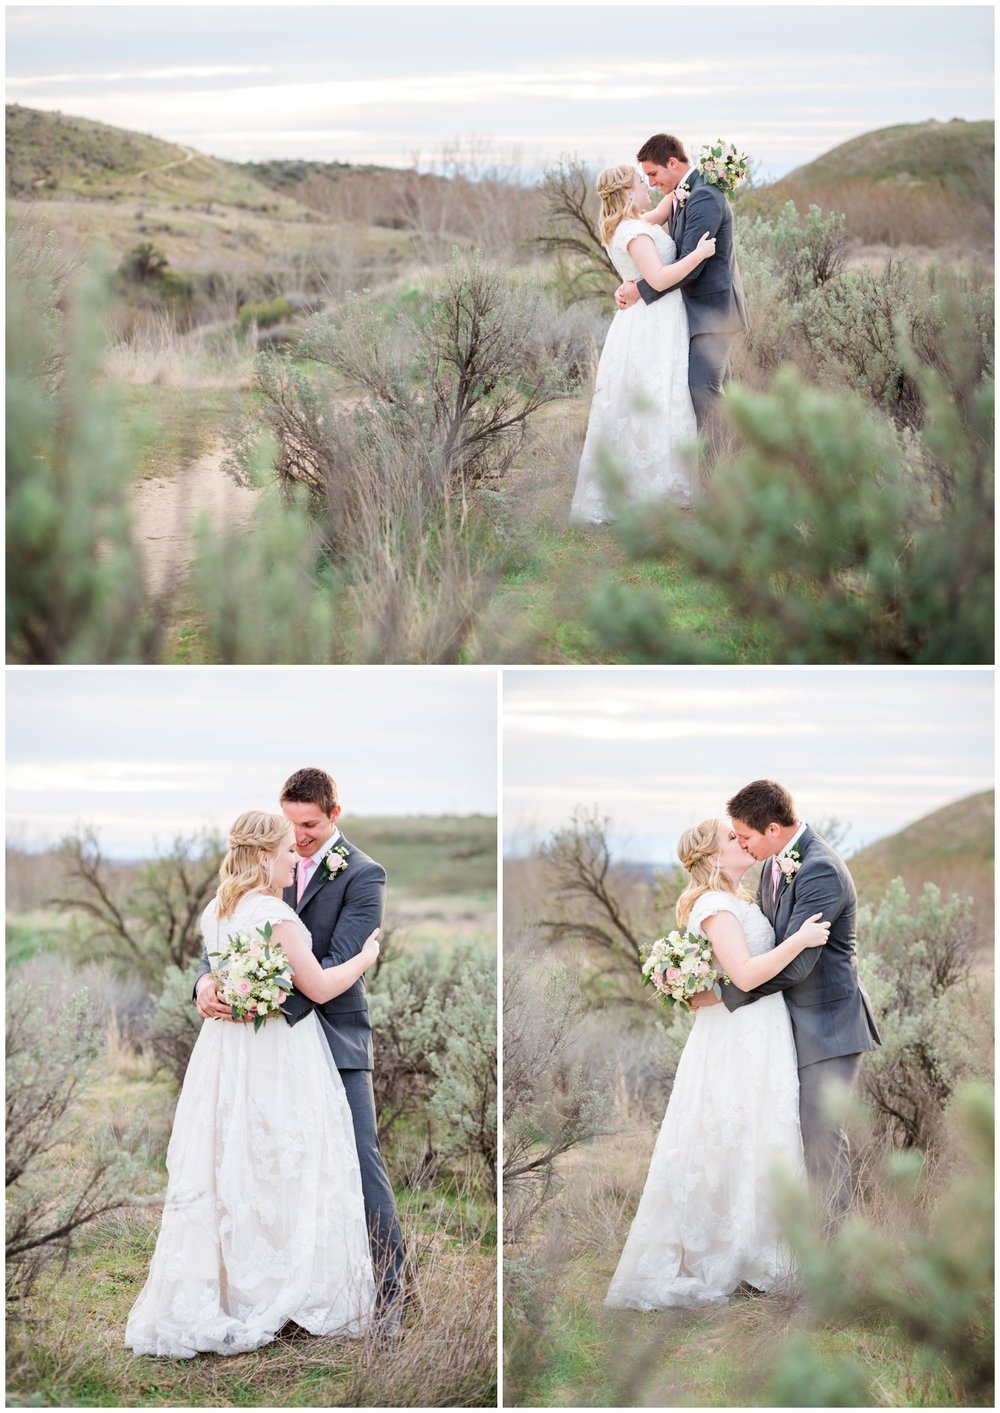  Bride and Groom portraits on hillside at sunset with sagebrush. 